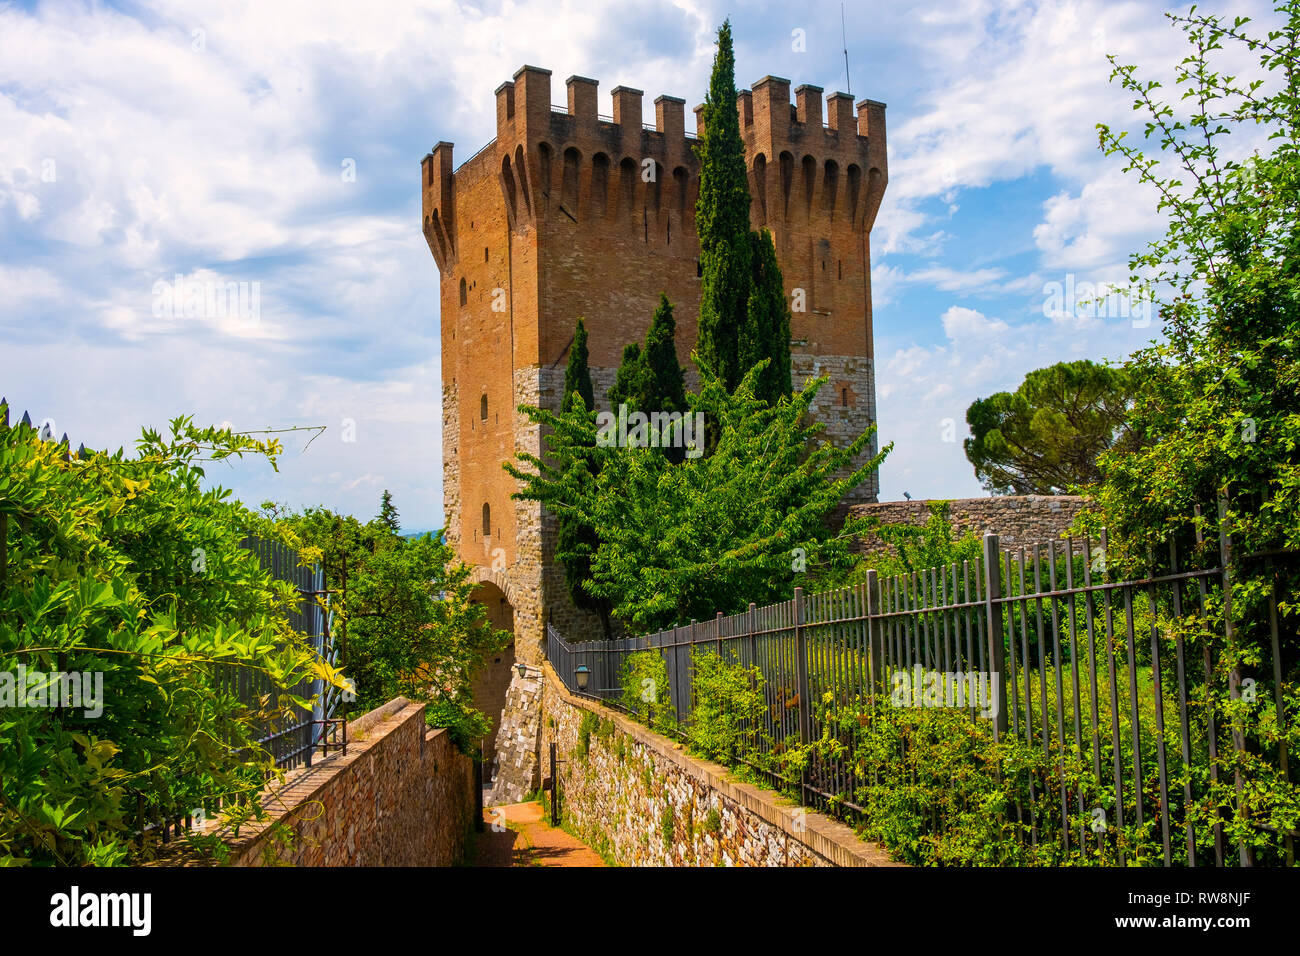 Perugia, Umbria / Italy - 2018/05/28: Stone tower and keep of St. Angelo Gate - Cassero di Porta Sant’Angelo - at the St. Michel Archangel Church in t Stock Photo